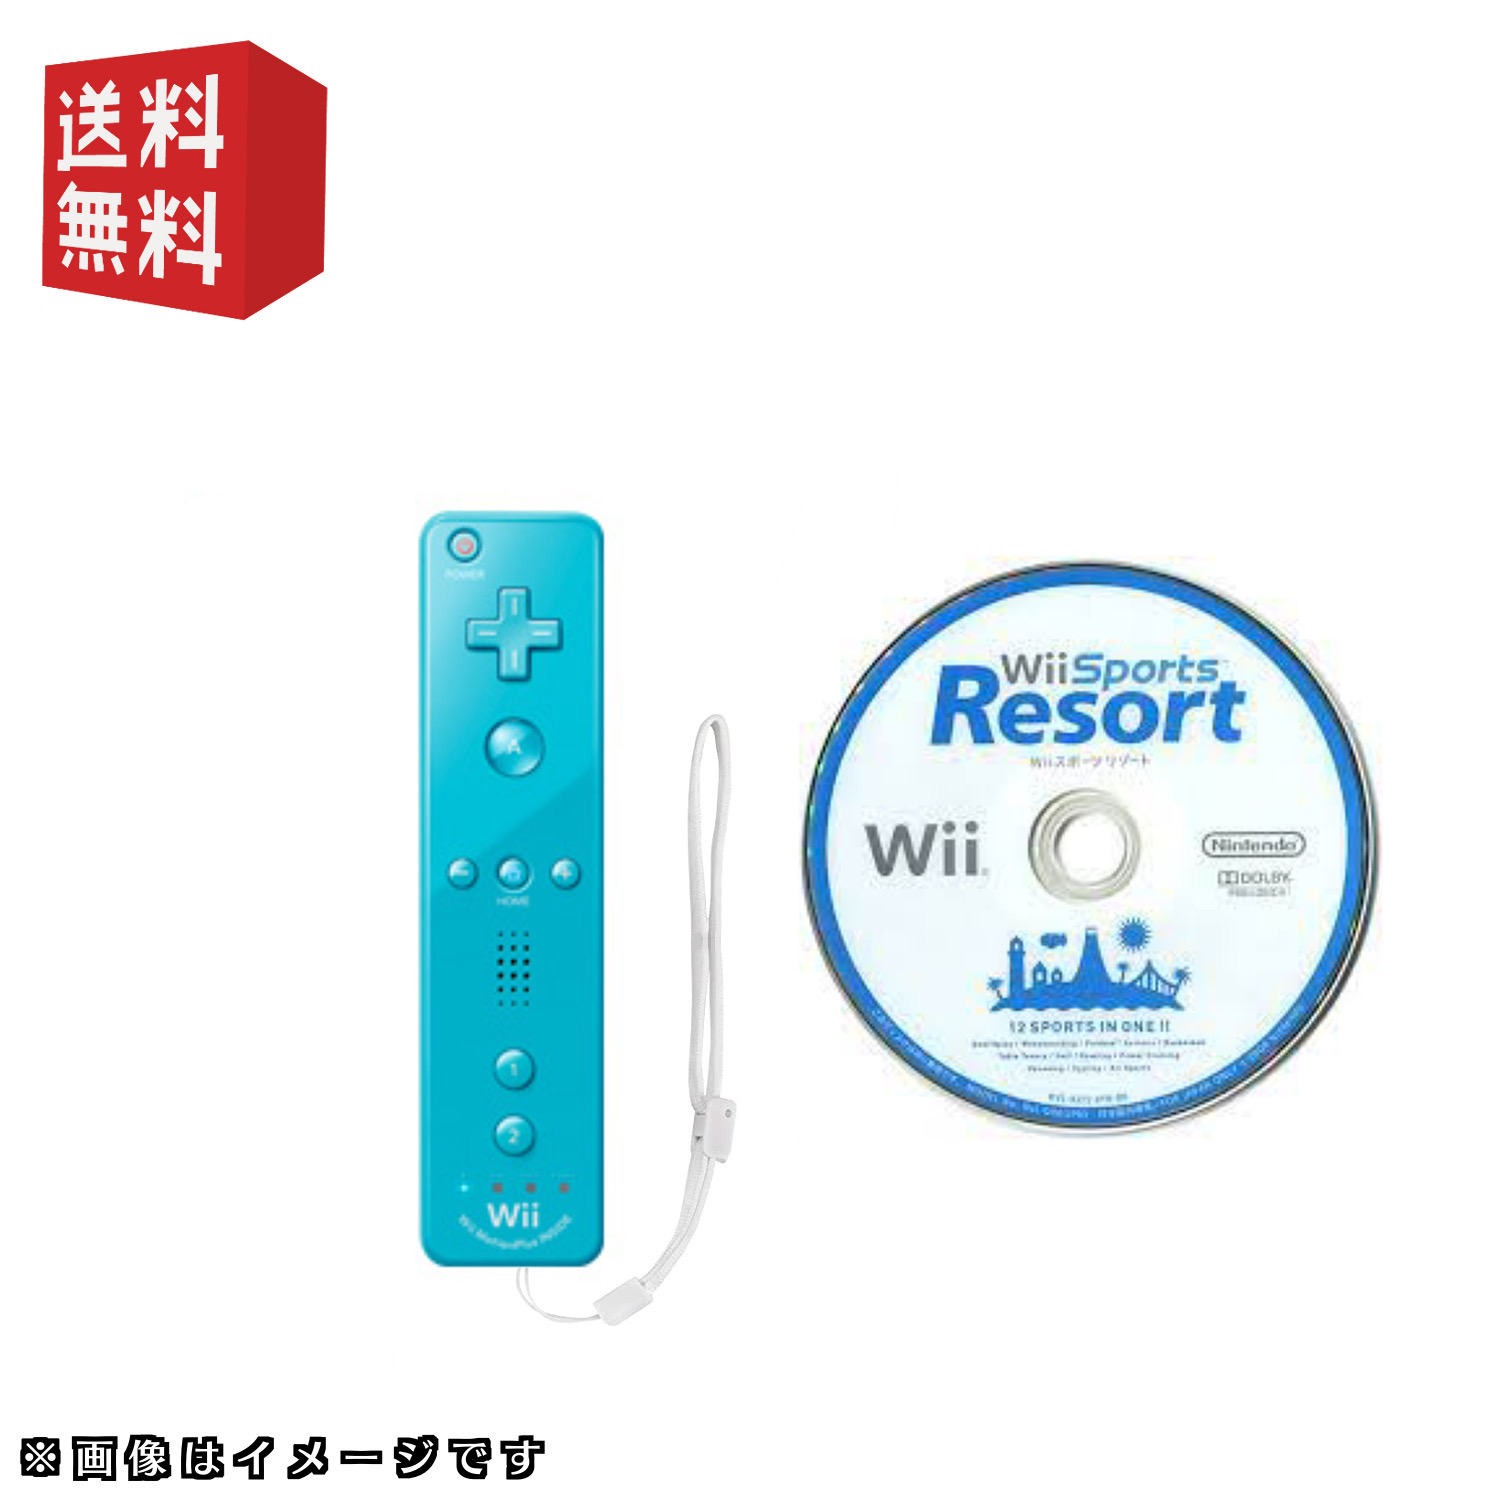 wiiソフト「wii スポーツリゾート」＋ wiiリモコンプラス セット 